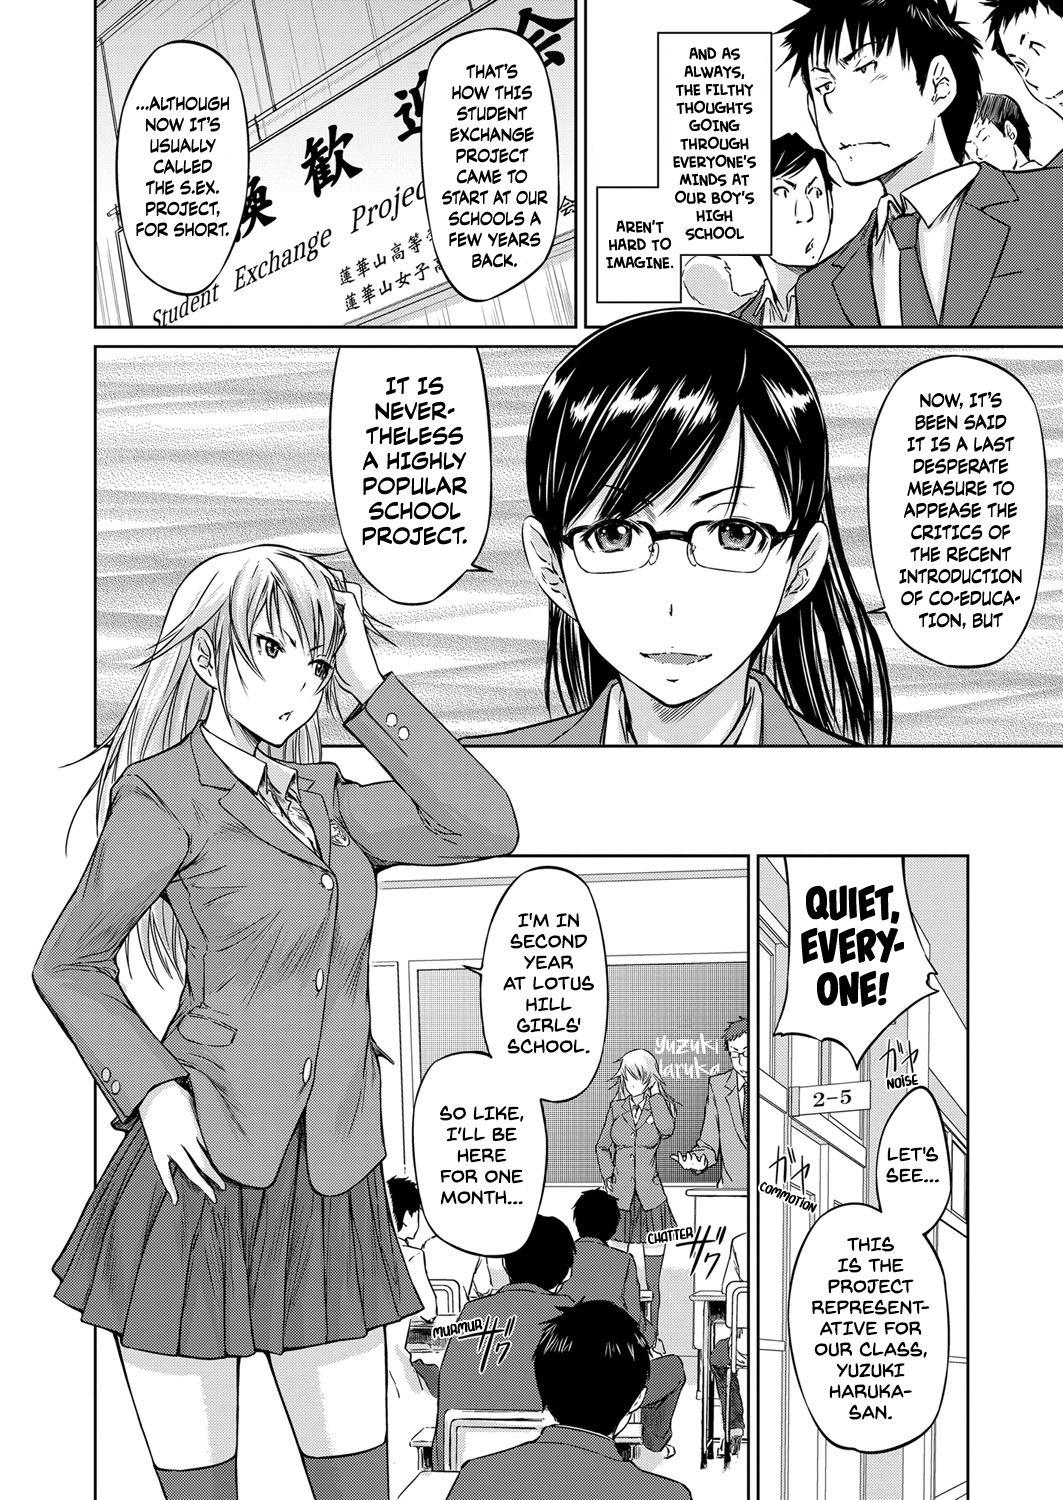 First Time Seitou Koukan no Susume | Student Exchange Recommendation Cameltoe - Page 2